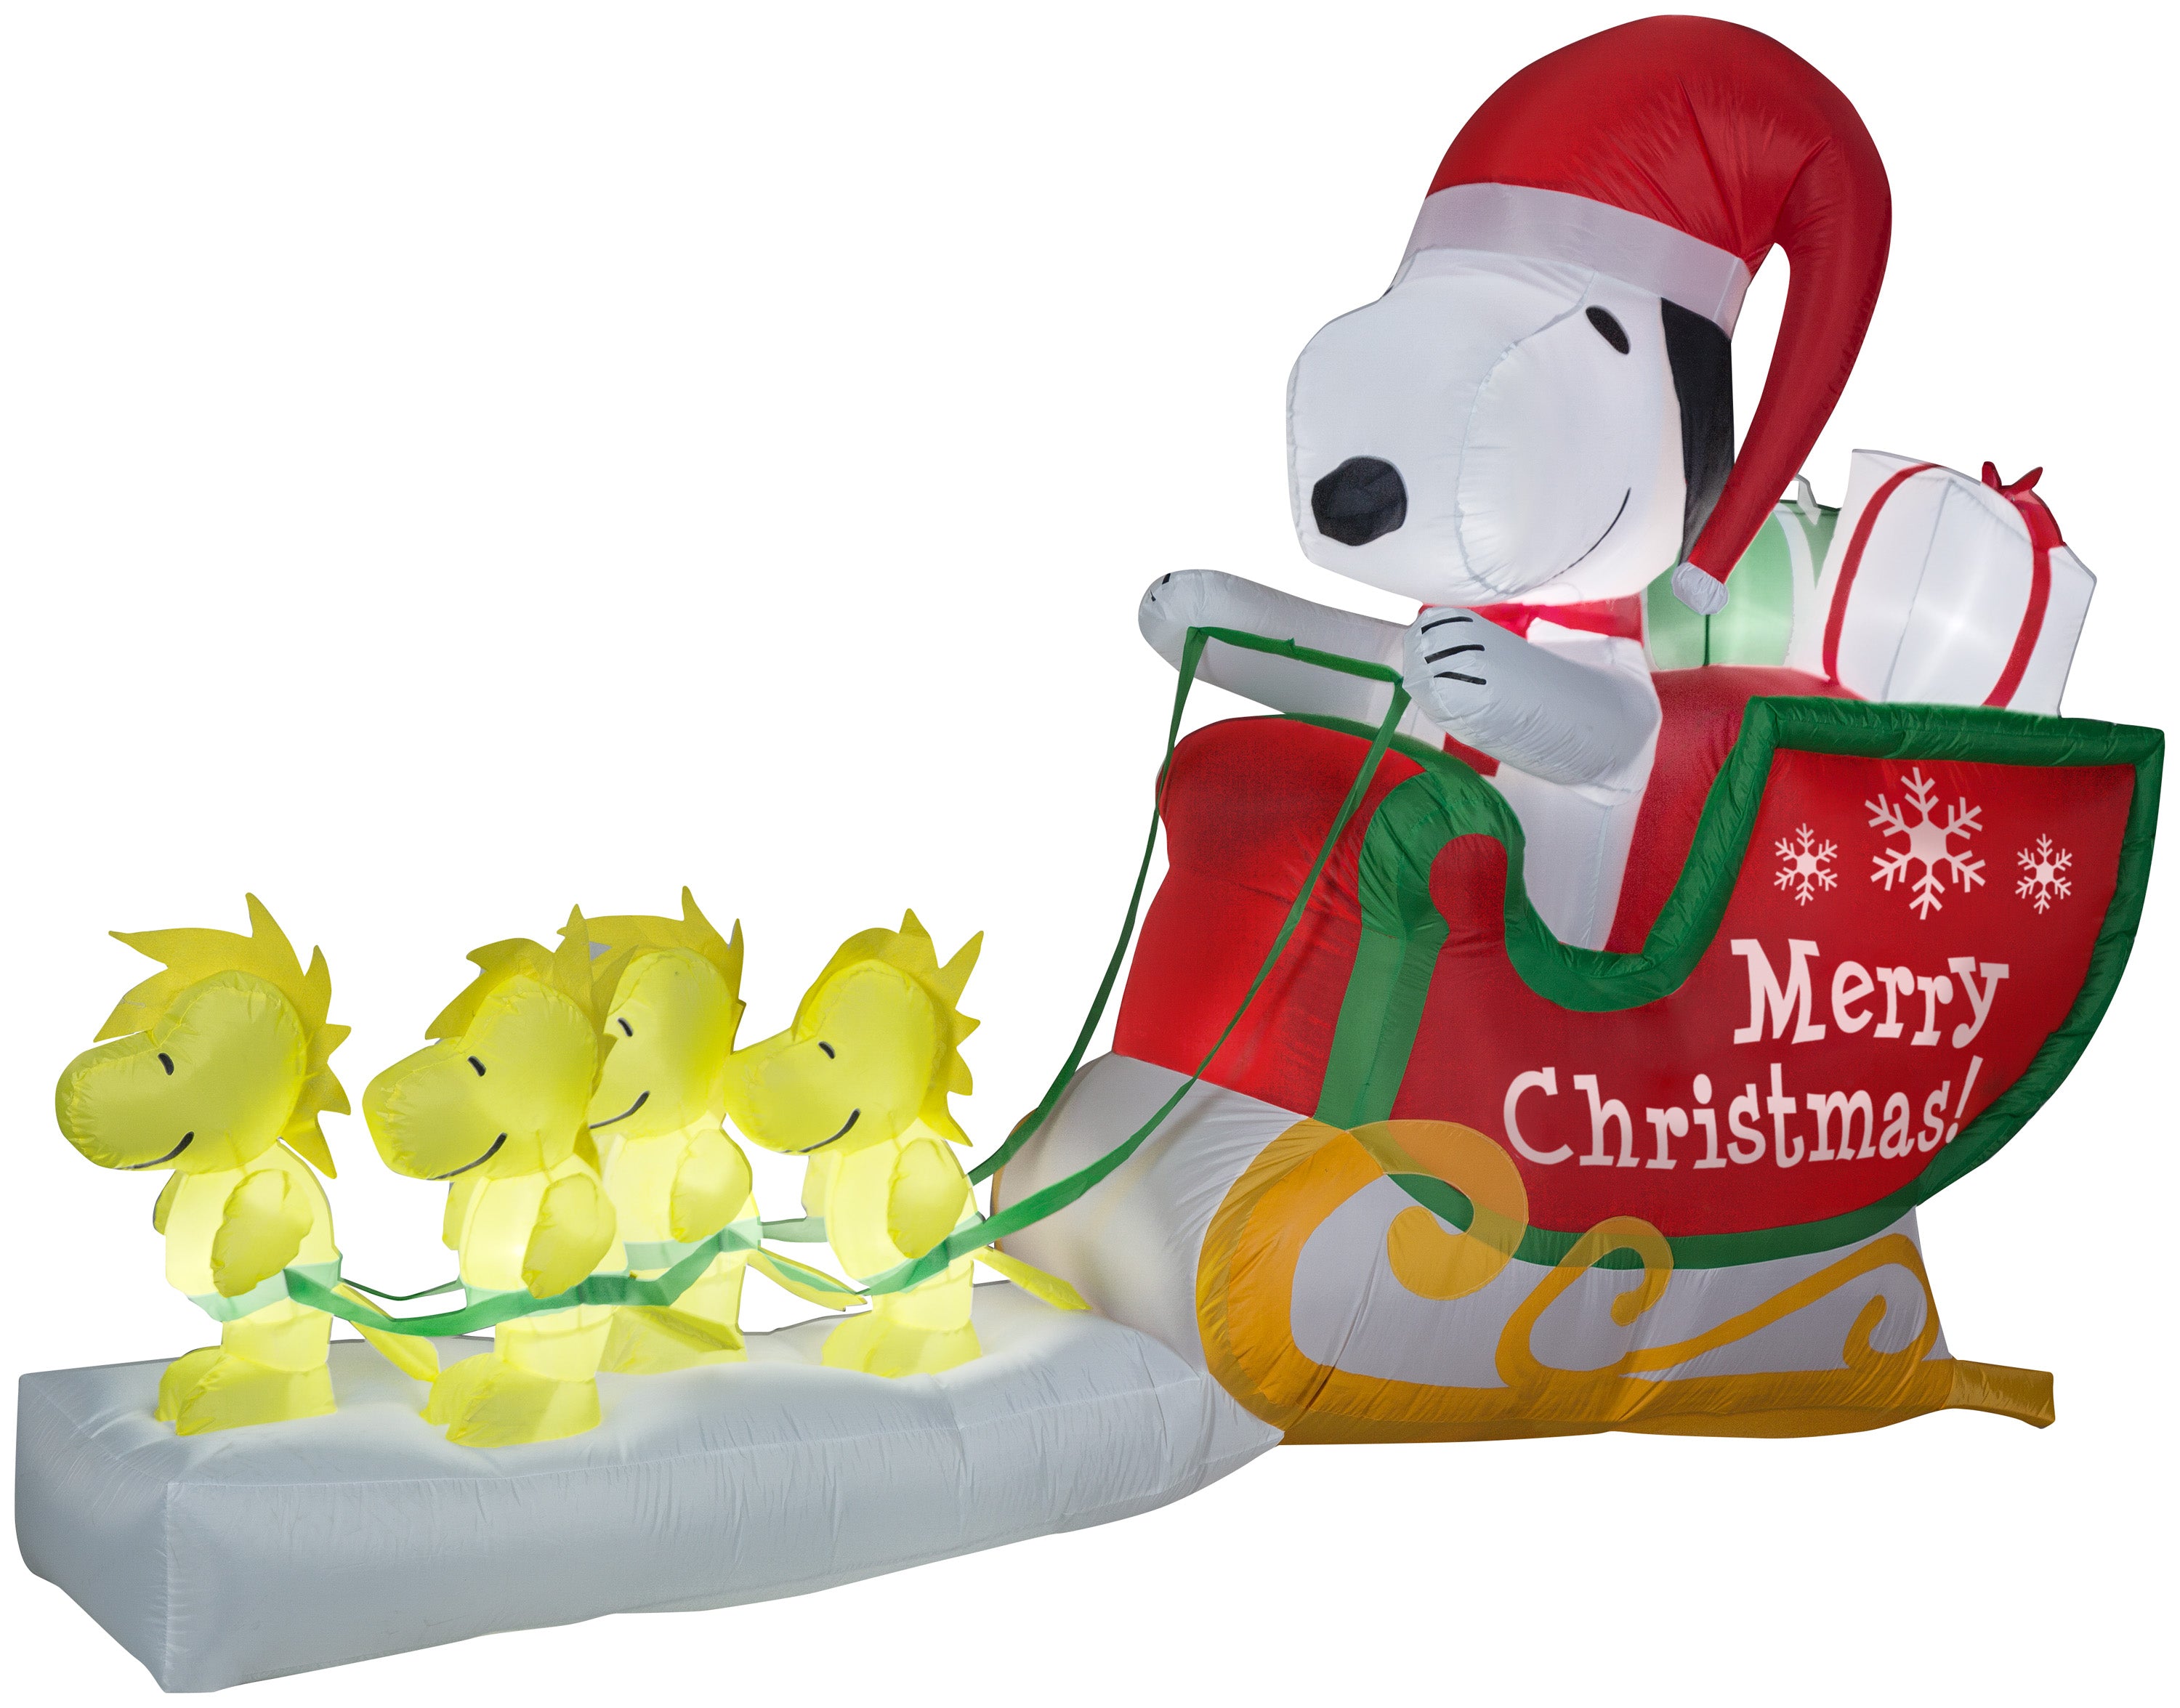 Gemmy 8' Airblown Inflatable Snoopy as Santa in Sleigh Scene